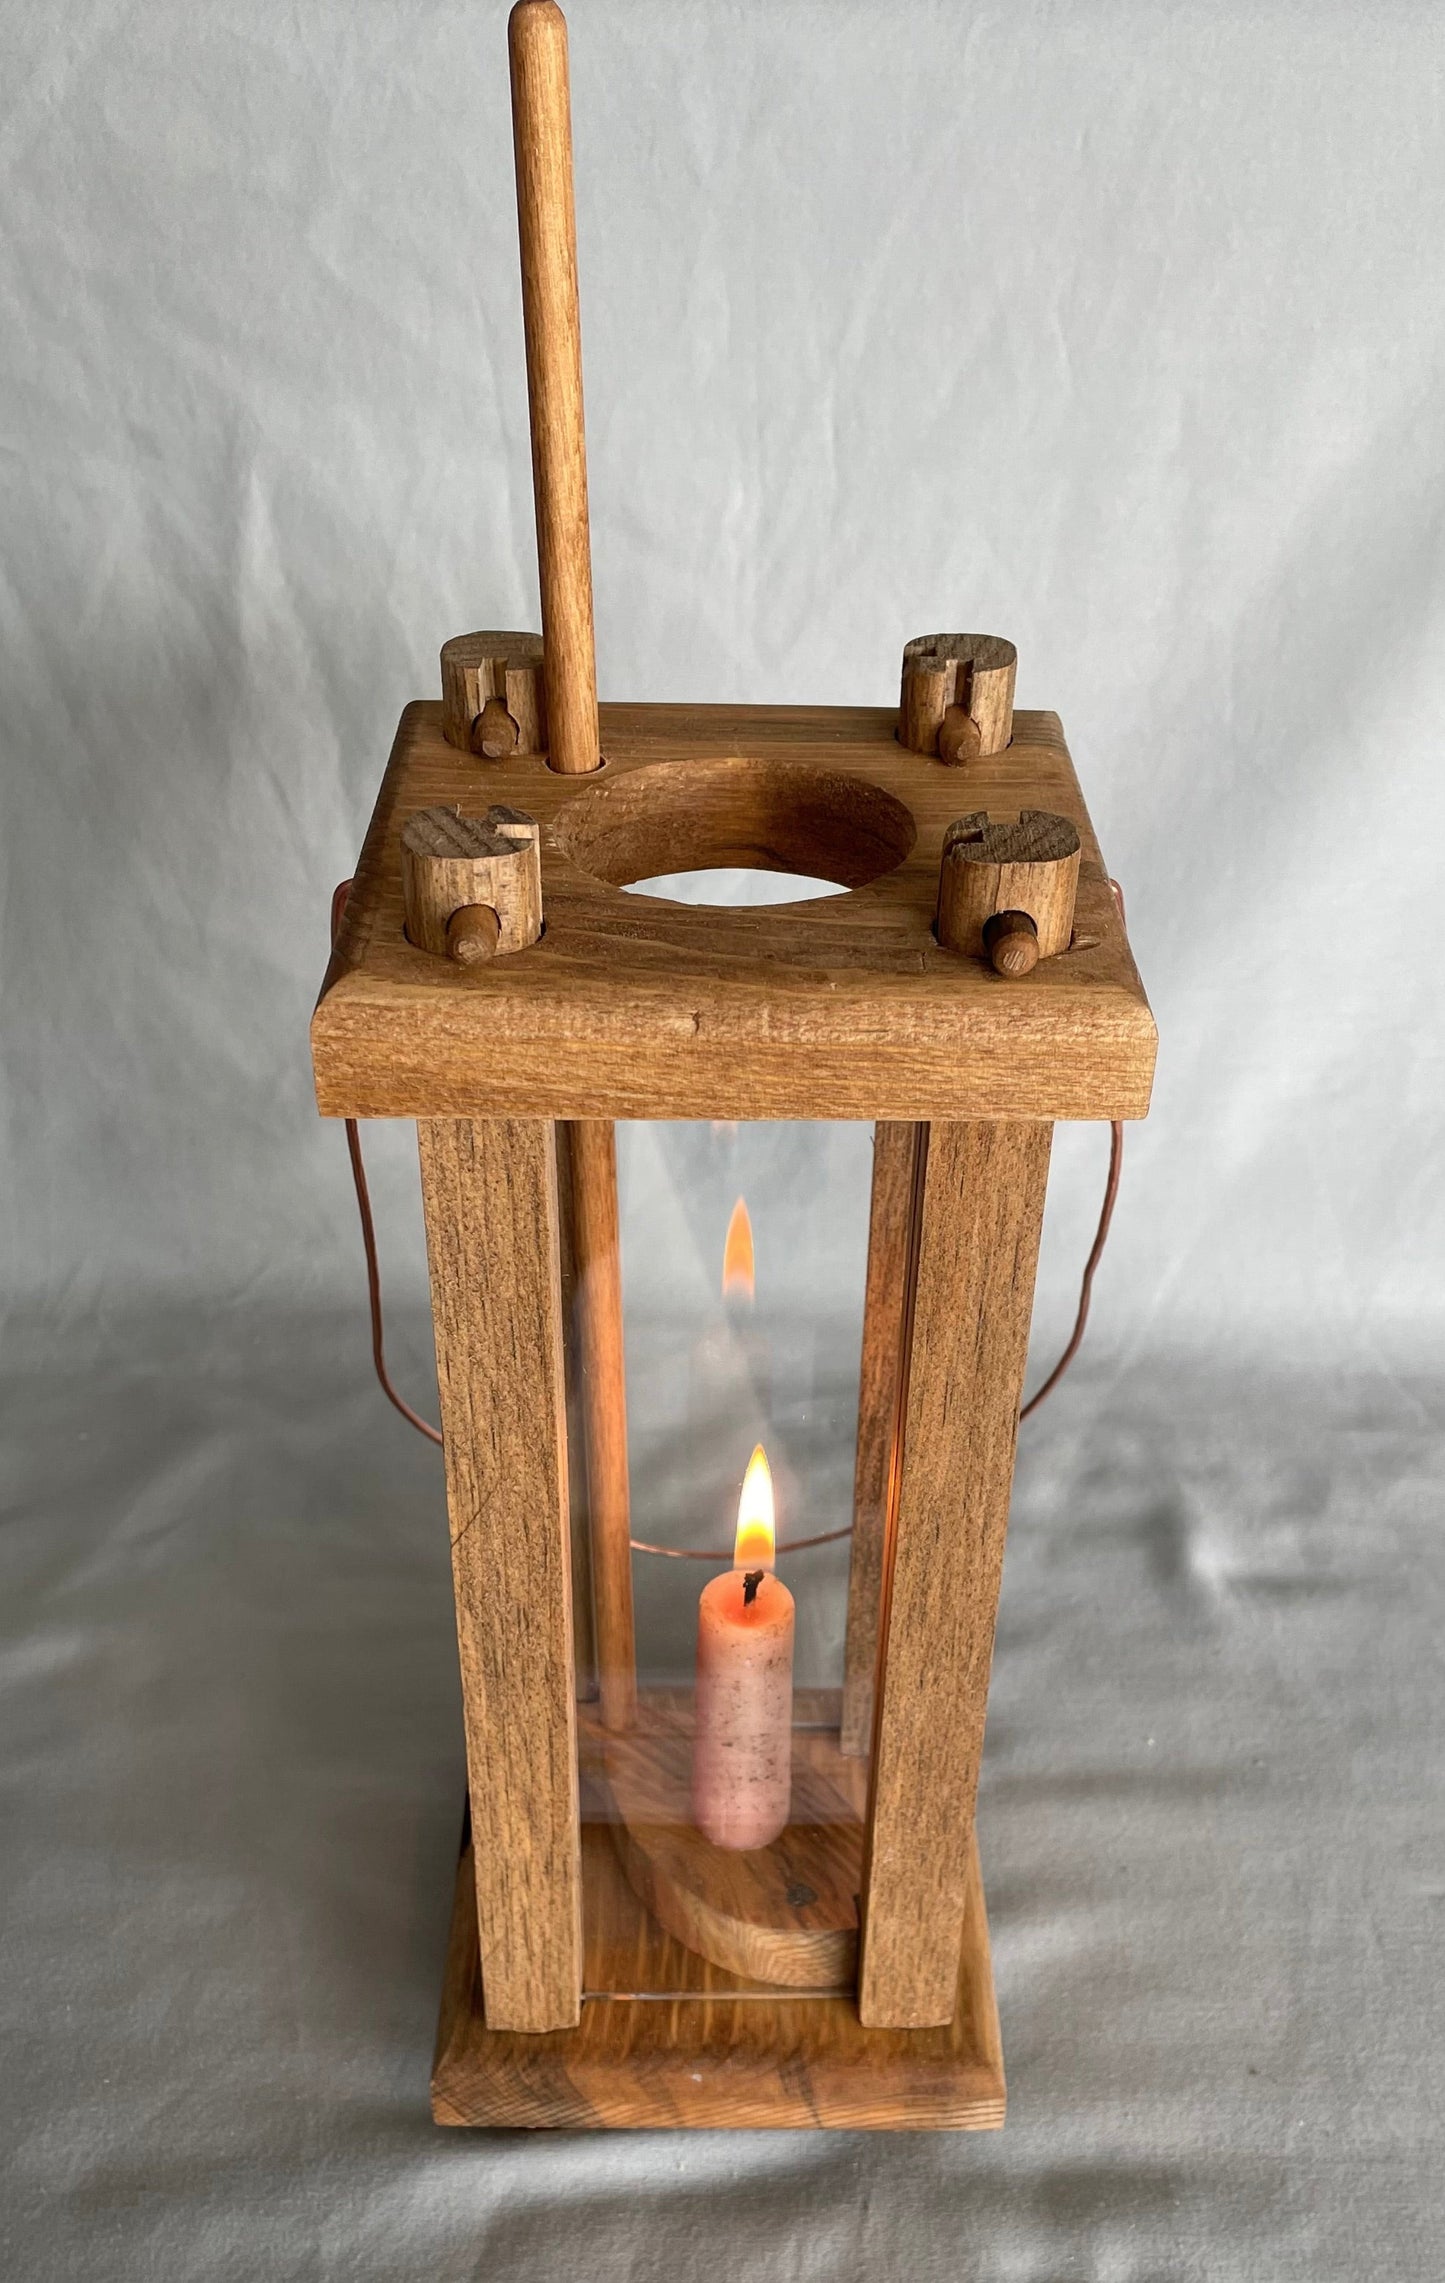 Small copy of a 19th century style lantern used during the early days of our country  Commonly found in log cabins, frontier camps, and in the common homes of the time  4.25" long x 14" high x 4.25" wide  Copper wire attached to the top wooden plate of the lantern allowing the lantern to be hung from a hook in the home, the tent, or from a tree  Will bring nice ambiance to a home or for those times when the power is out. Battery candles recoomended to prevent fire hazard